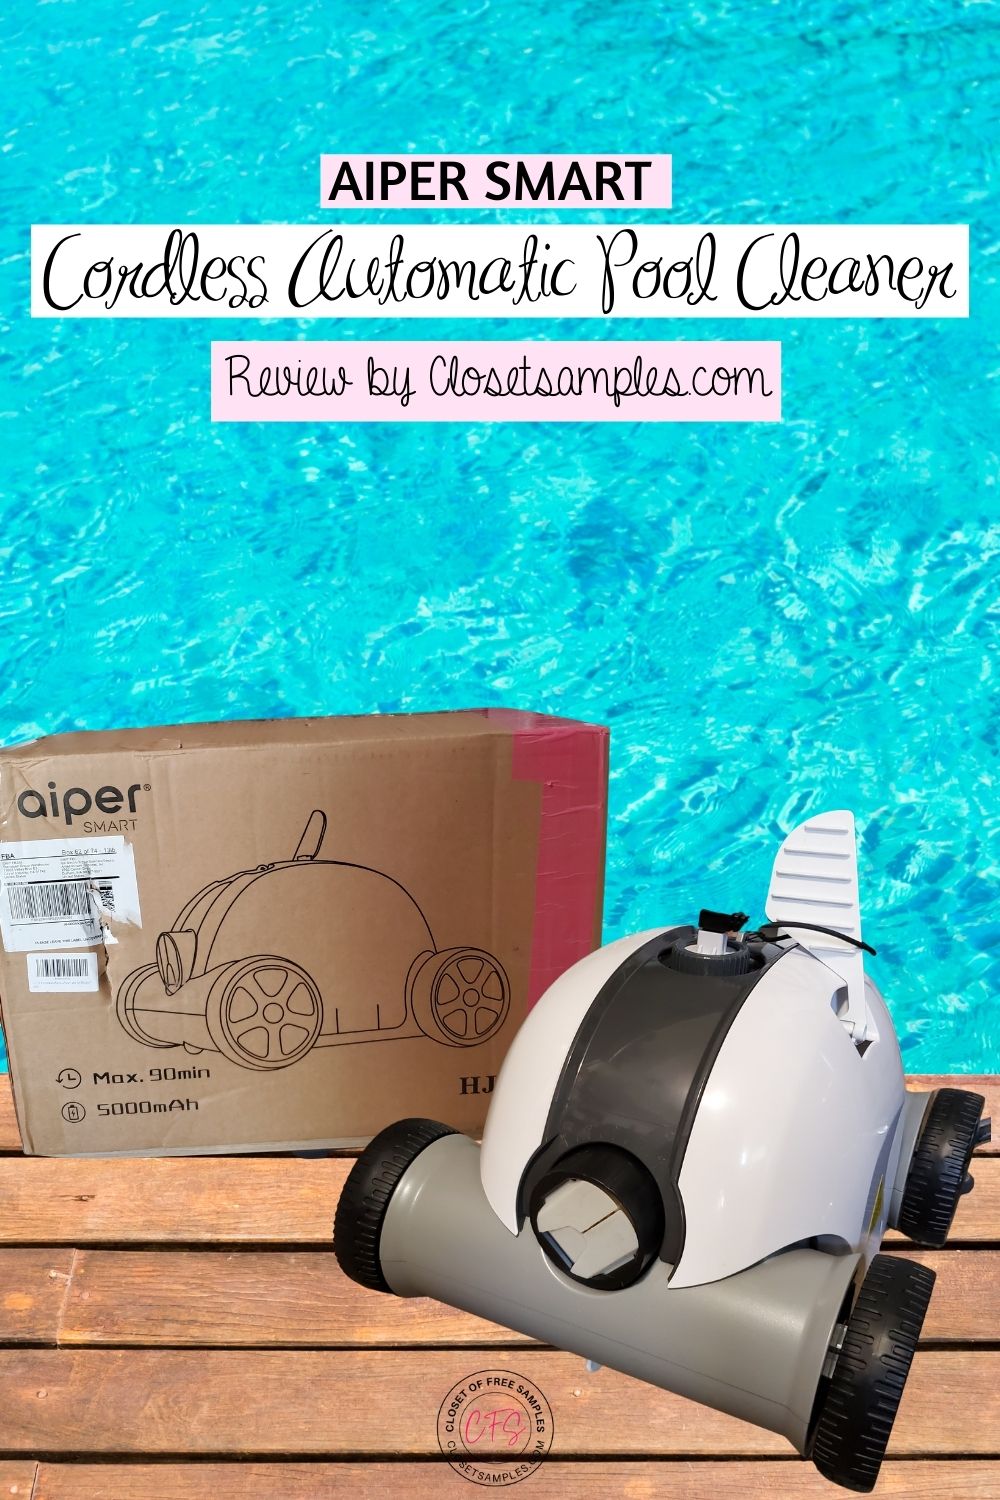 AIPER SMART Cordless Automatic Pool Cleaner review Closetsamples Pinterest